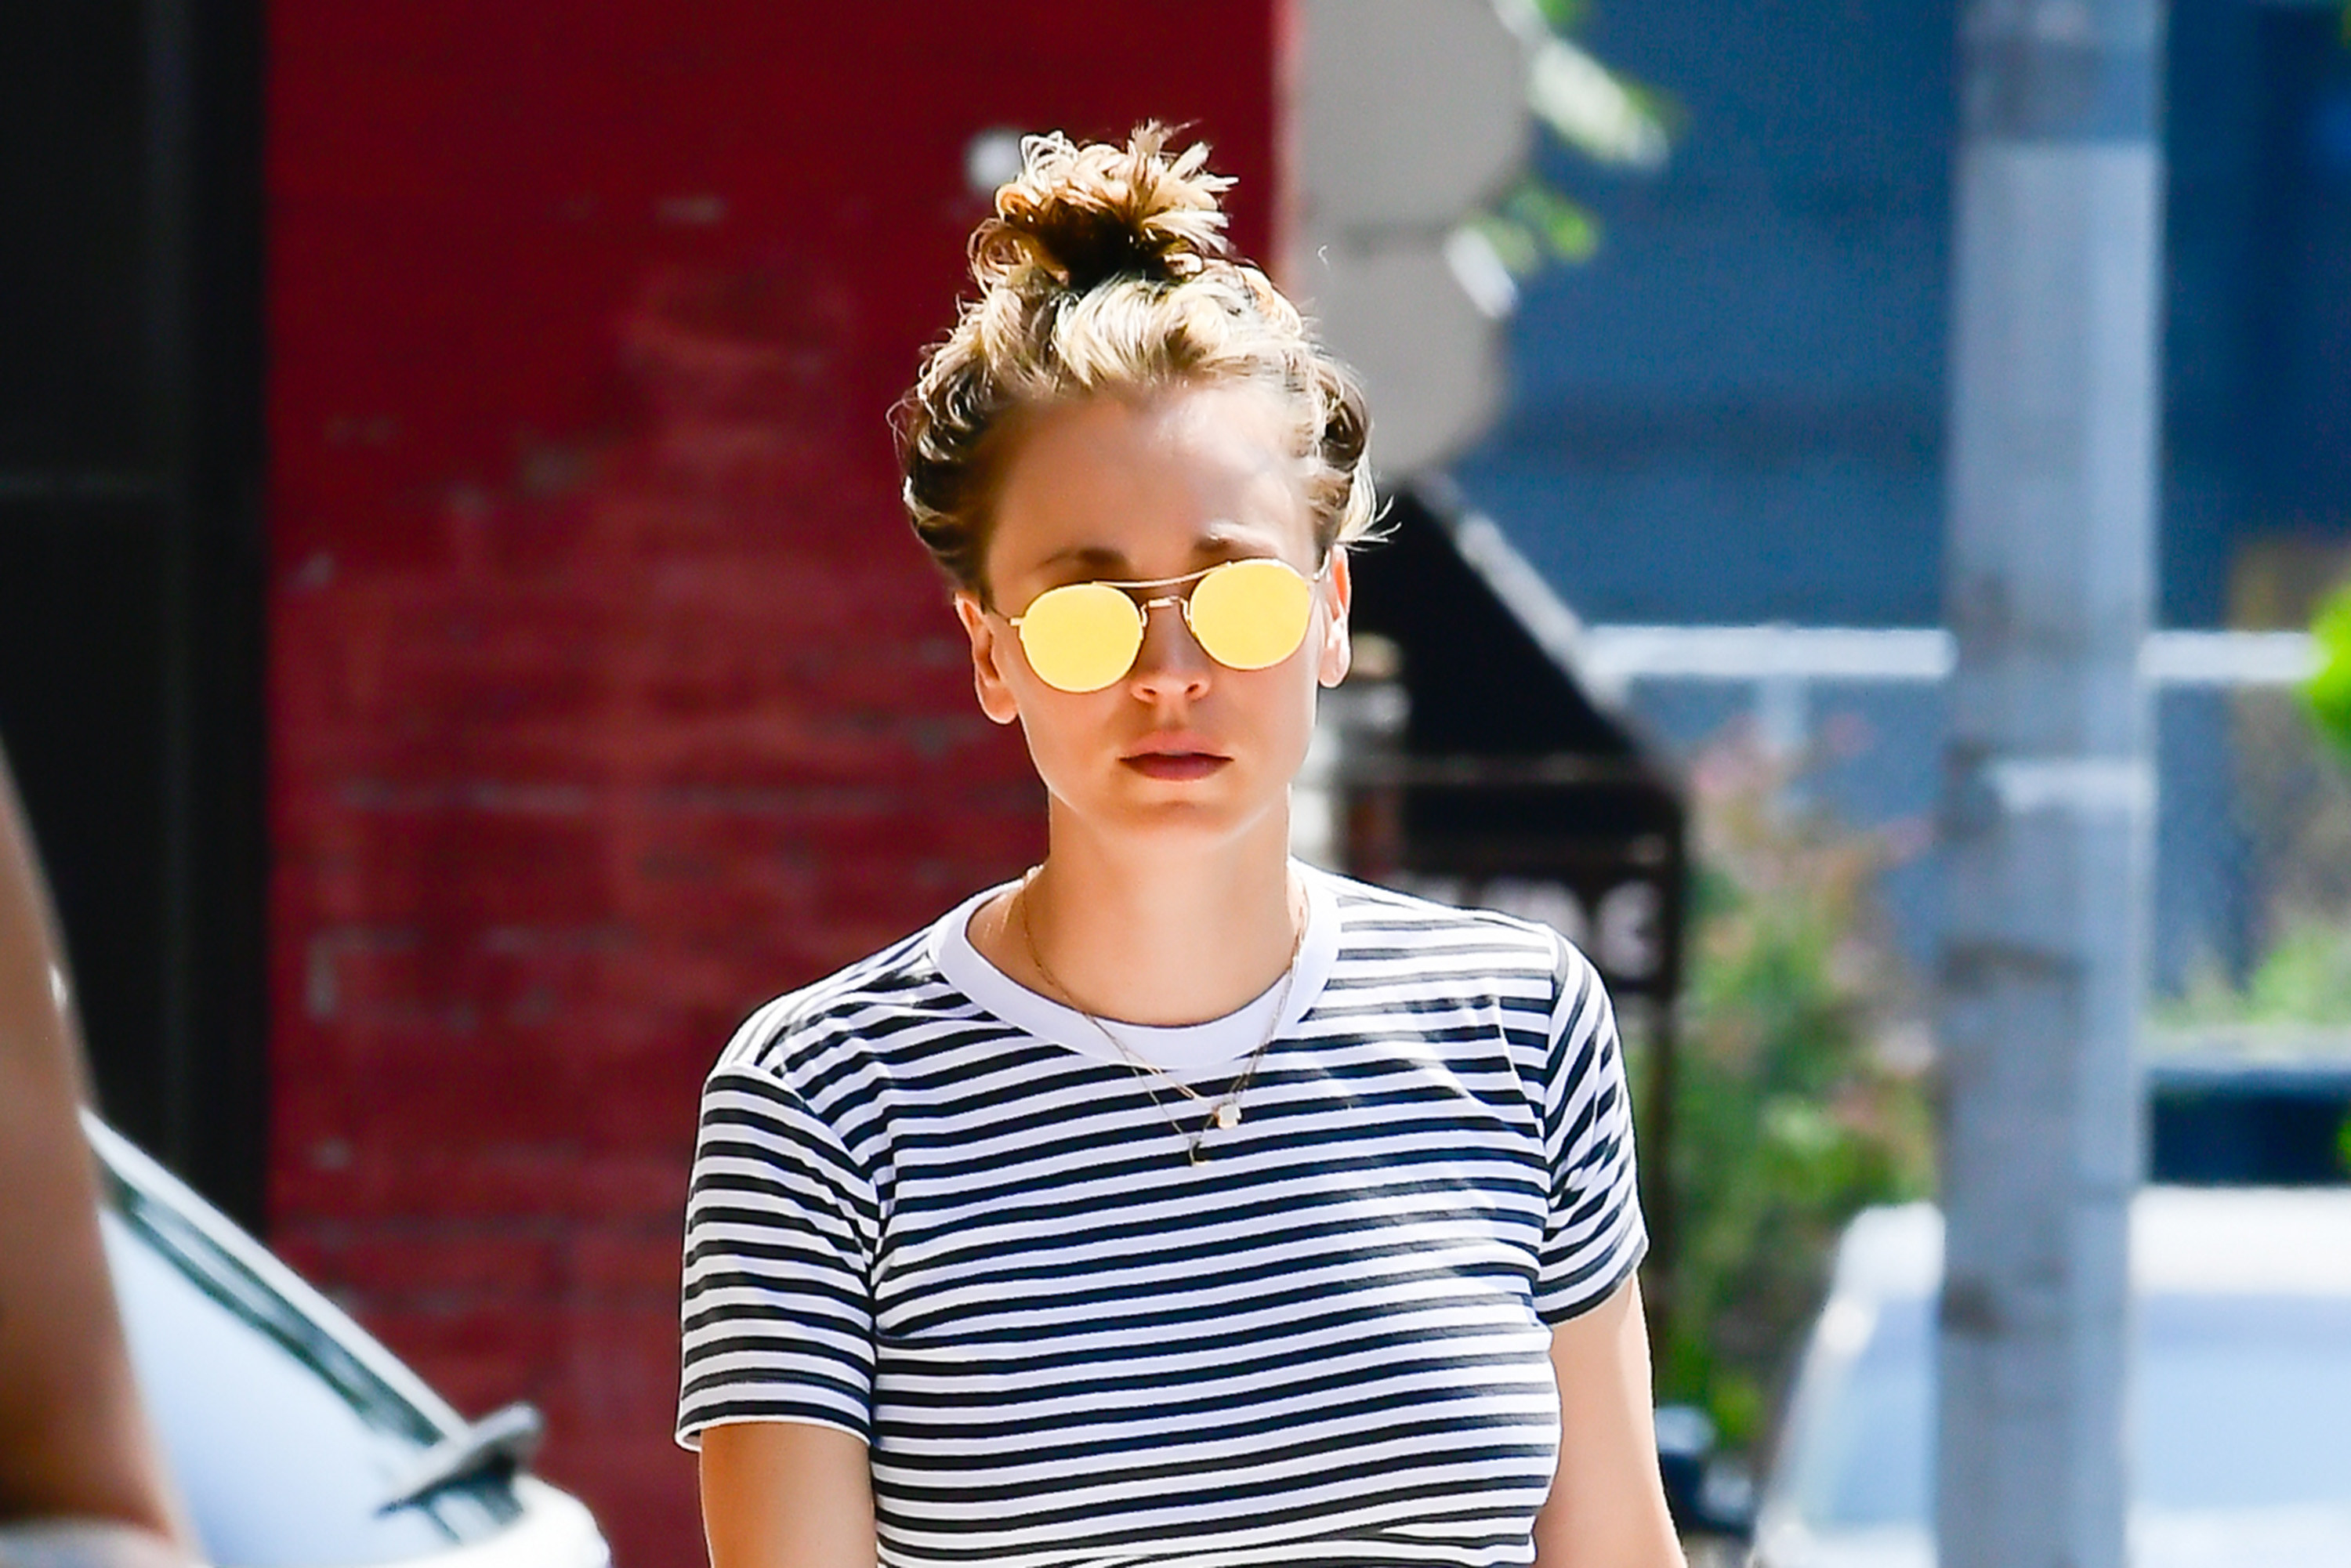 Kaley walks down the street in sunglasses and a striped shirt